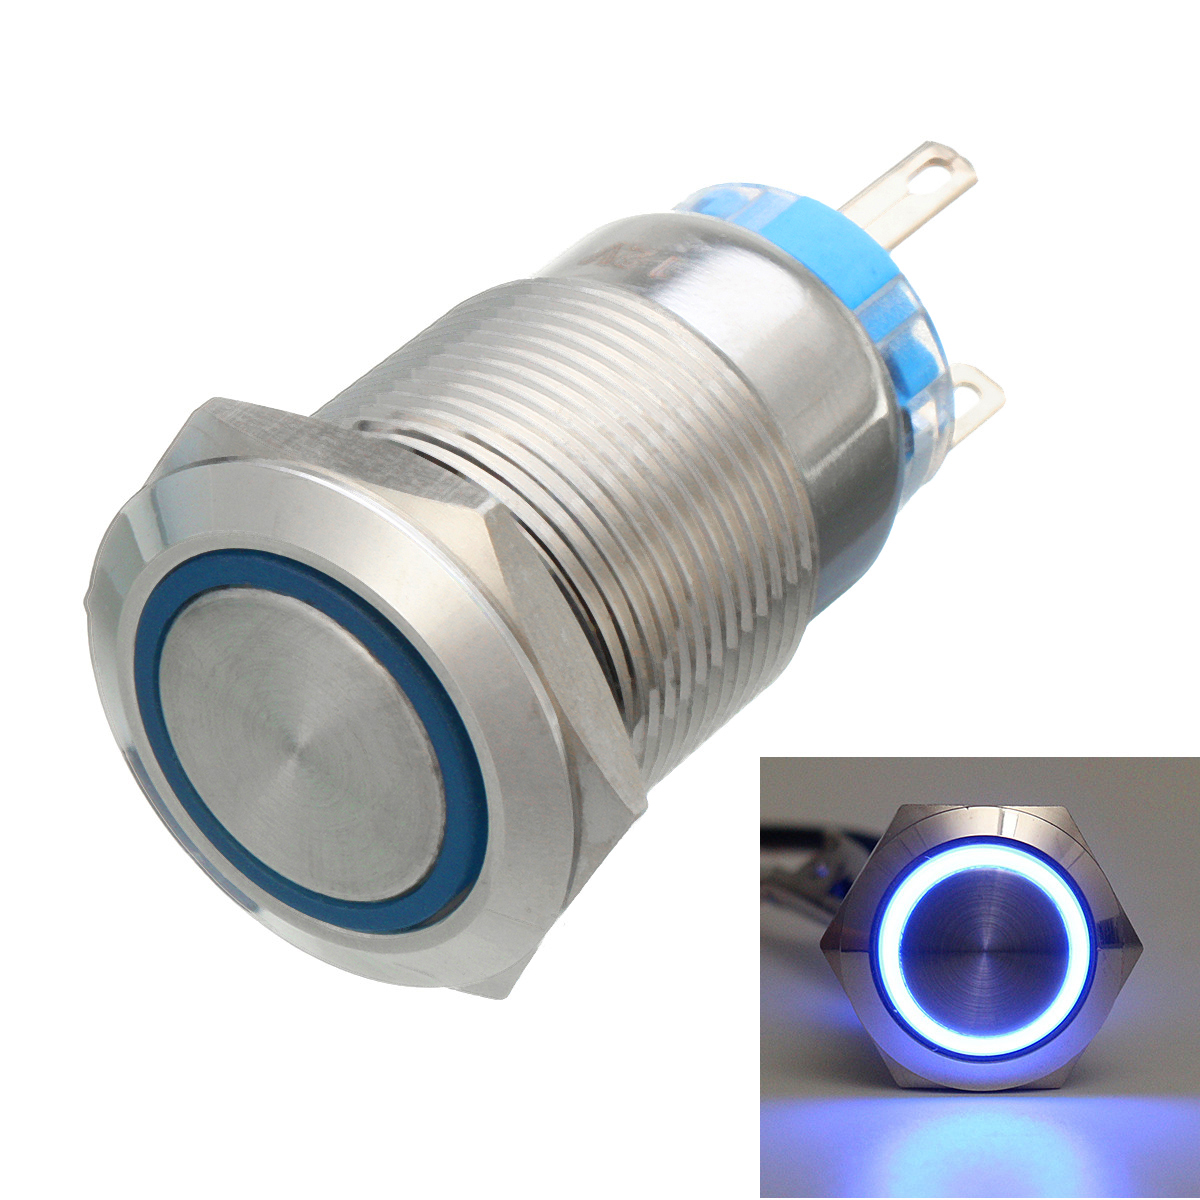 12V-5-Pin-19mm-Led-Light-Stainless-Steel-Push-Button-Momentary-Switch-Sliver-1181527-9